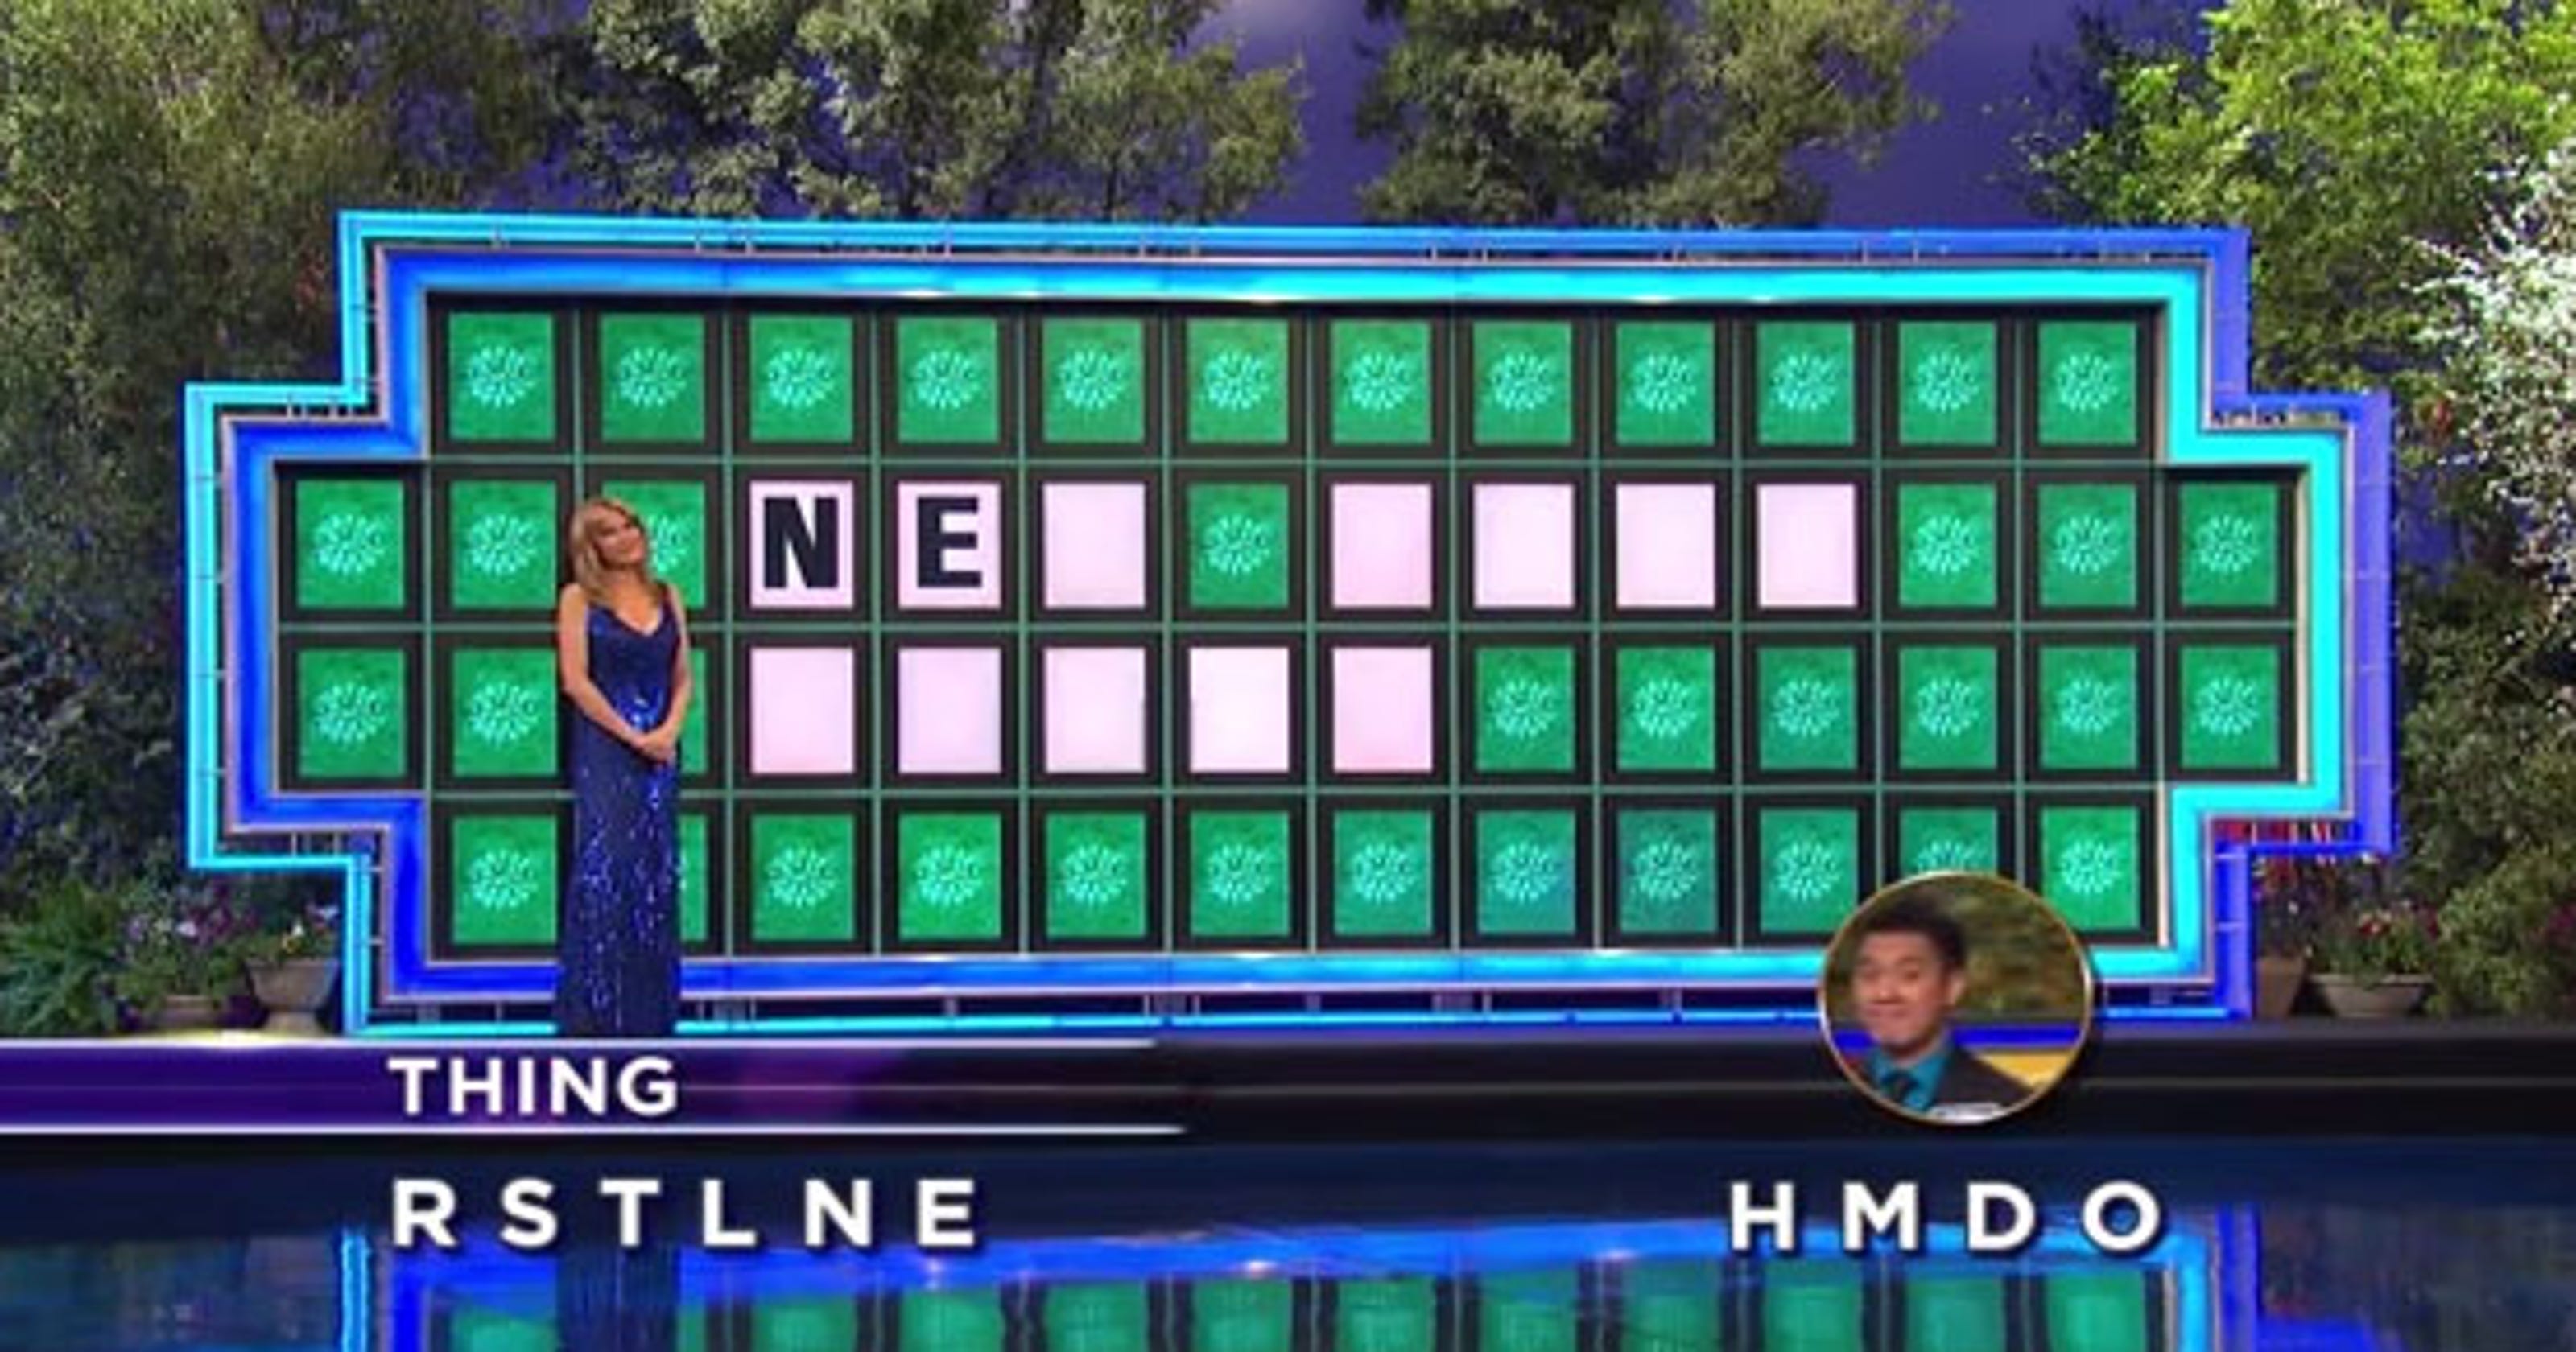 Pat Sajak stunned by 'Wheel of Fortune' win3200 x 1680